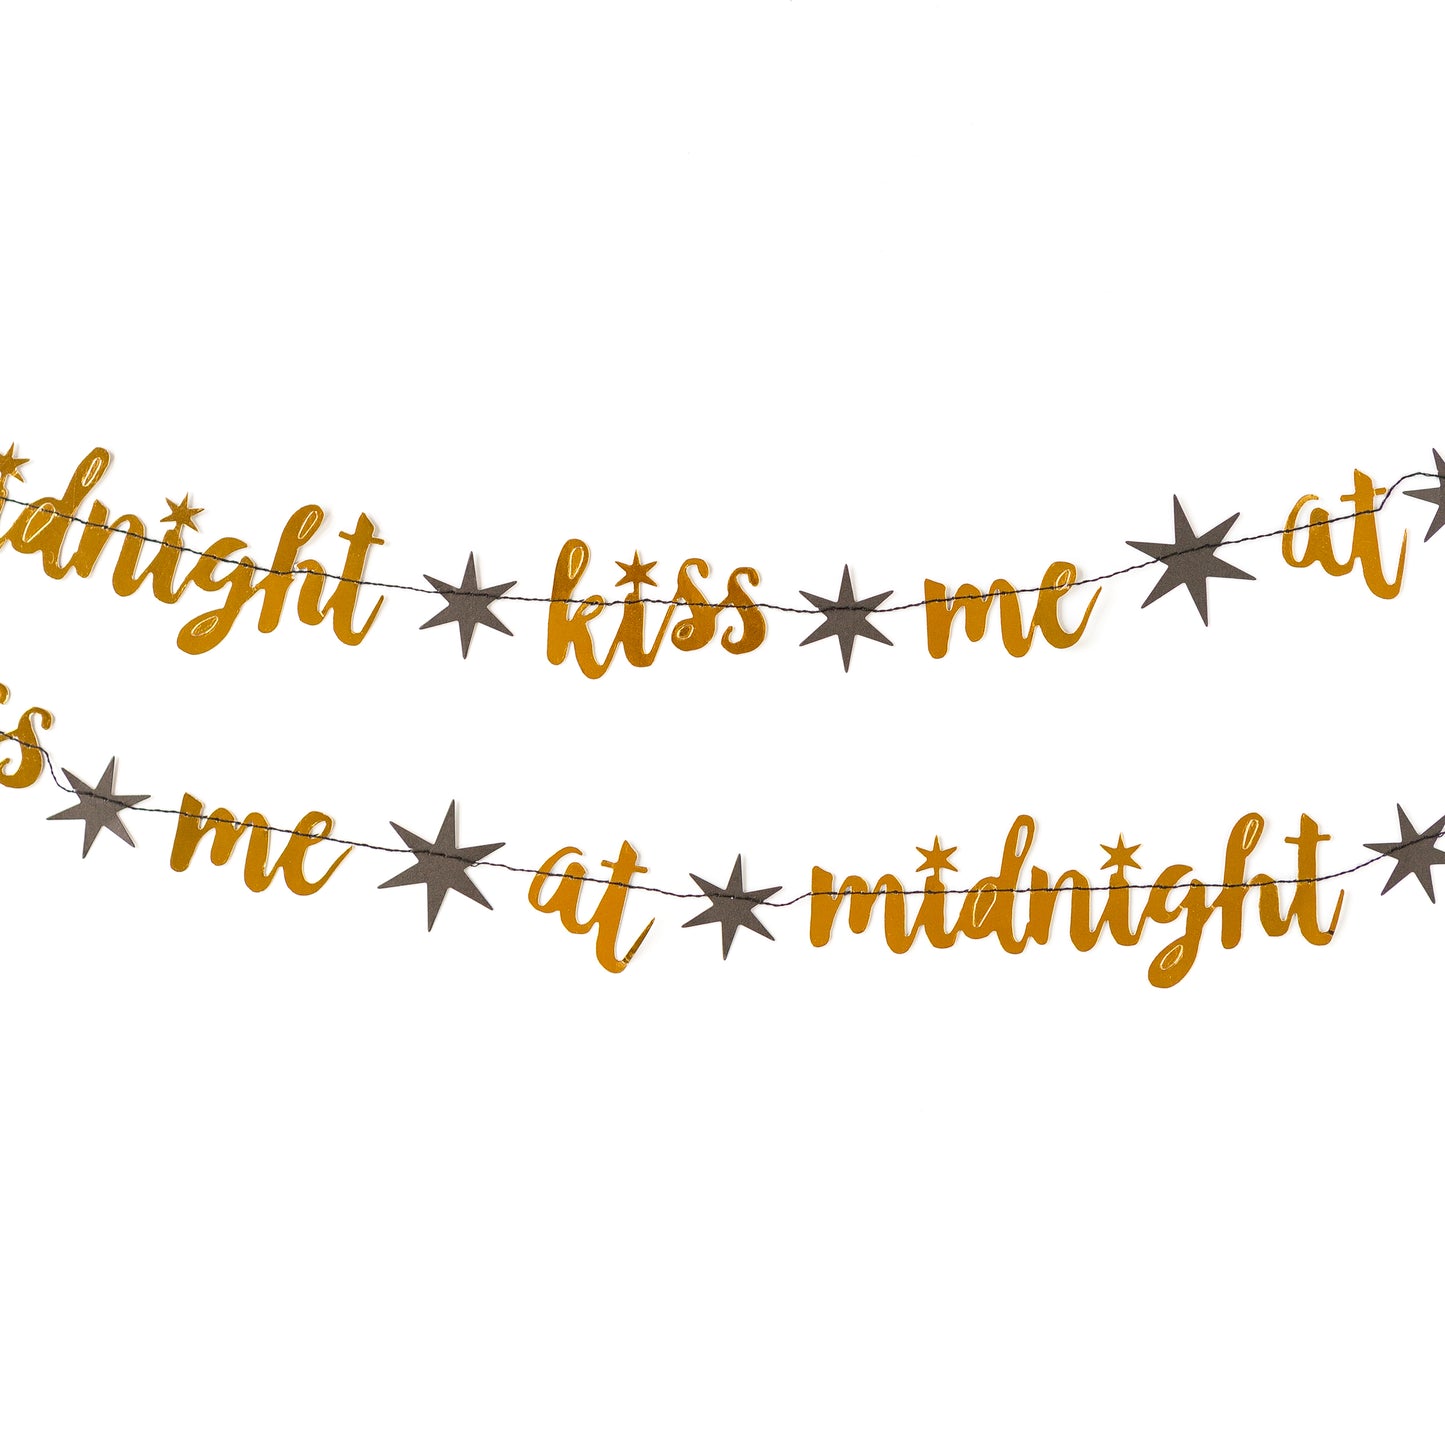 New Year's Eve "Kiss Me at Midnight" Banner